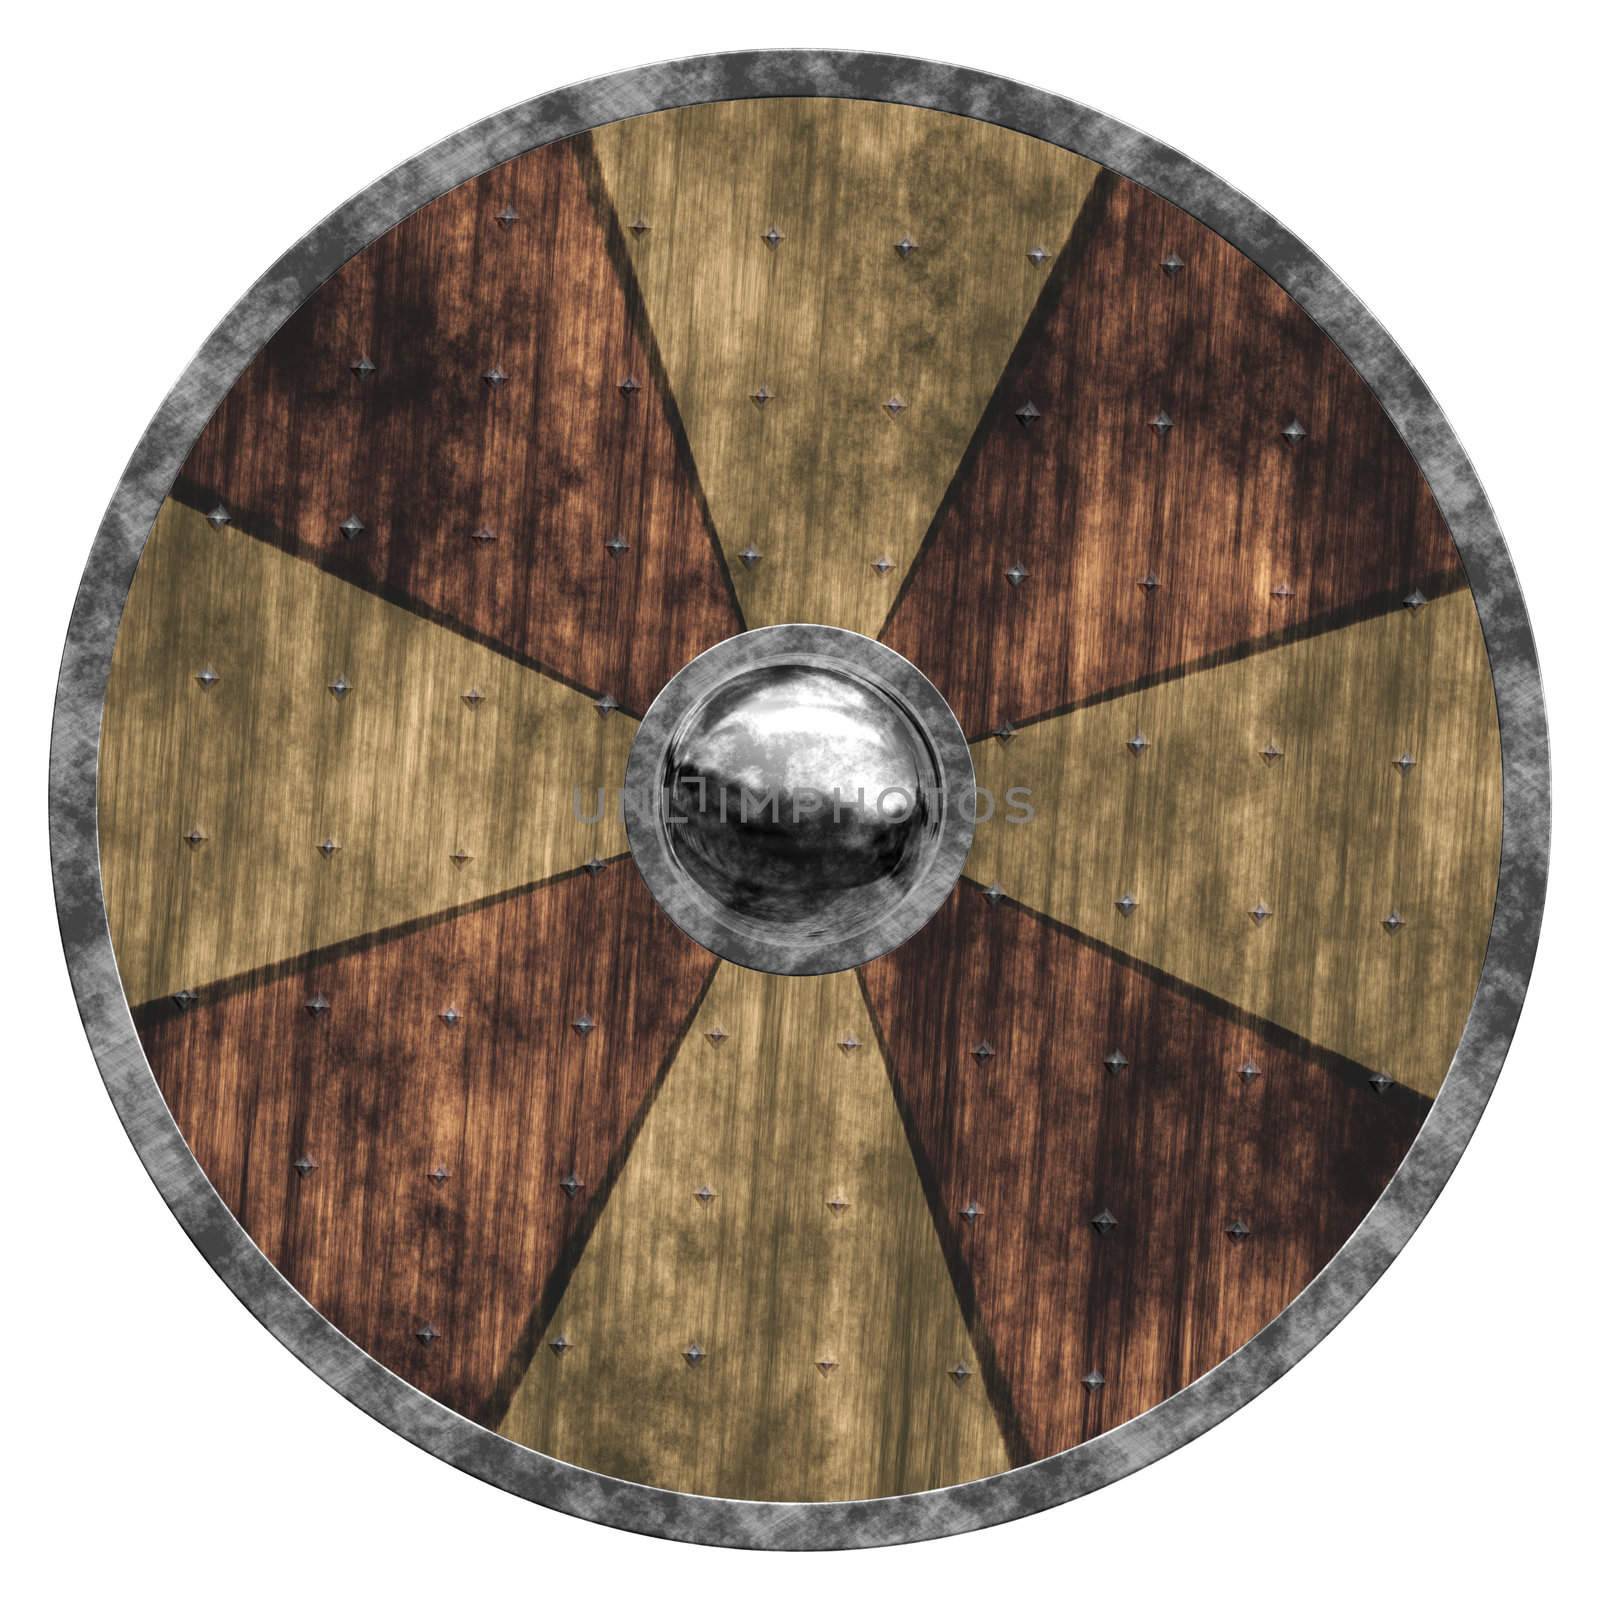 An illustration of a nice old shield